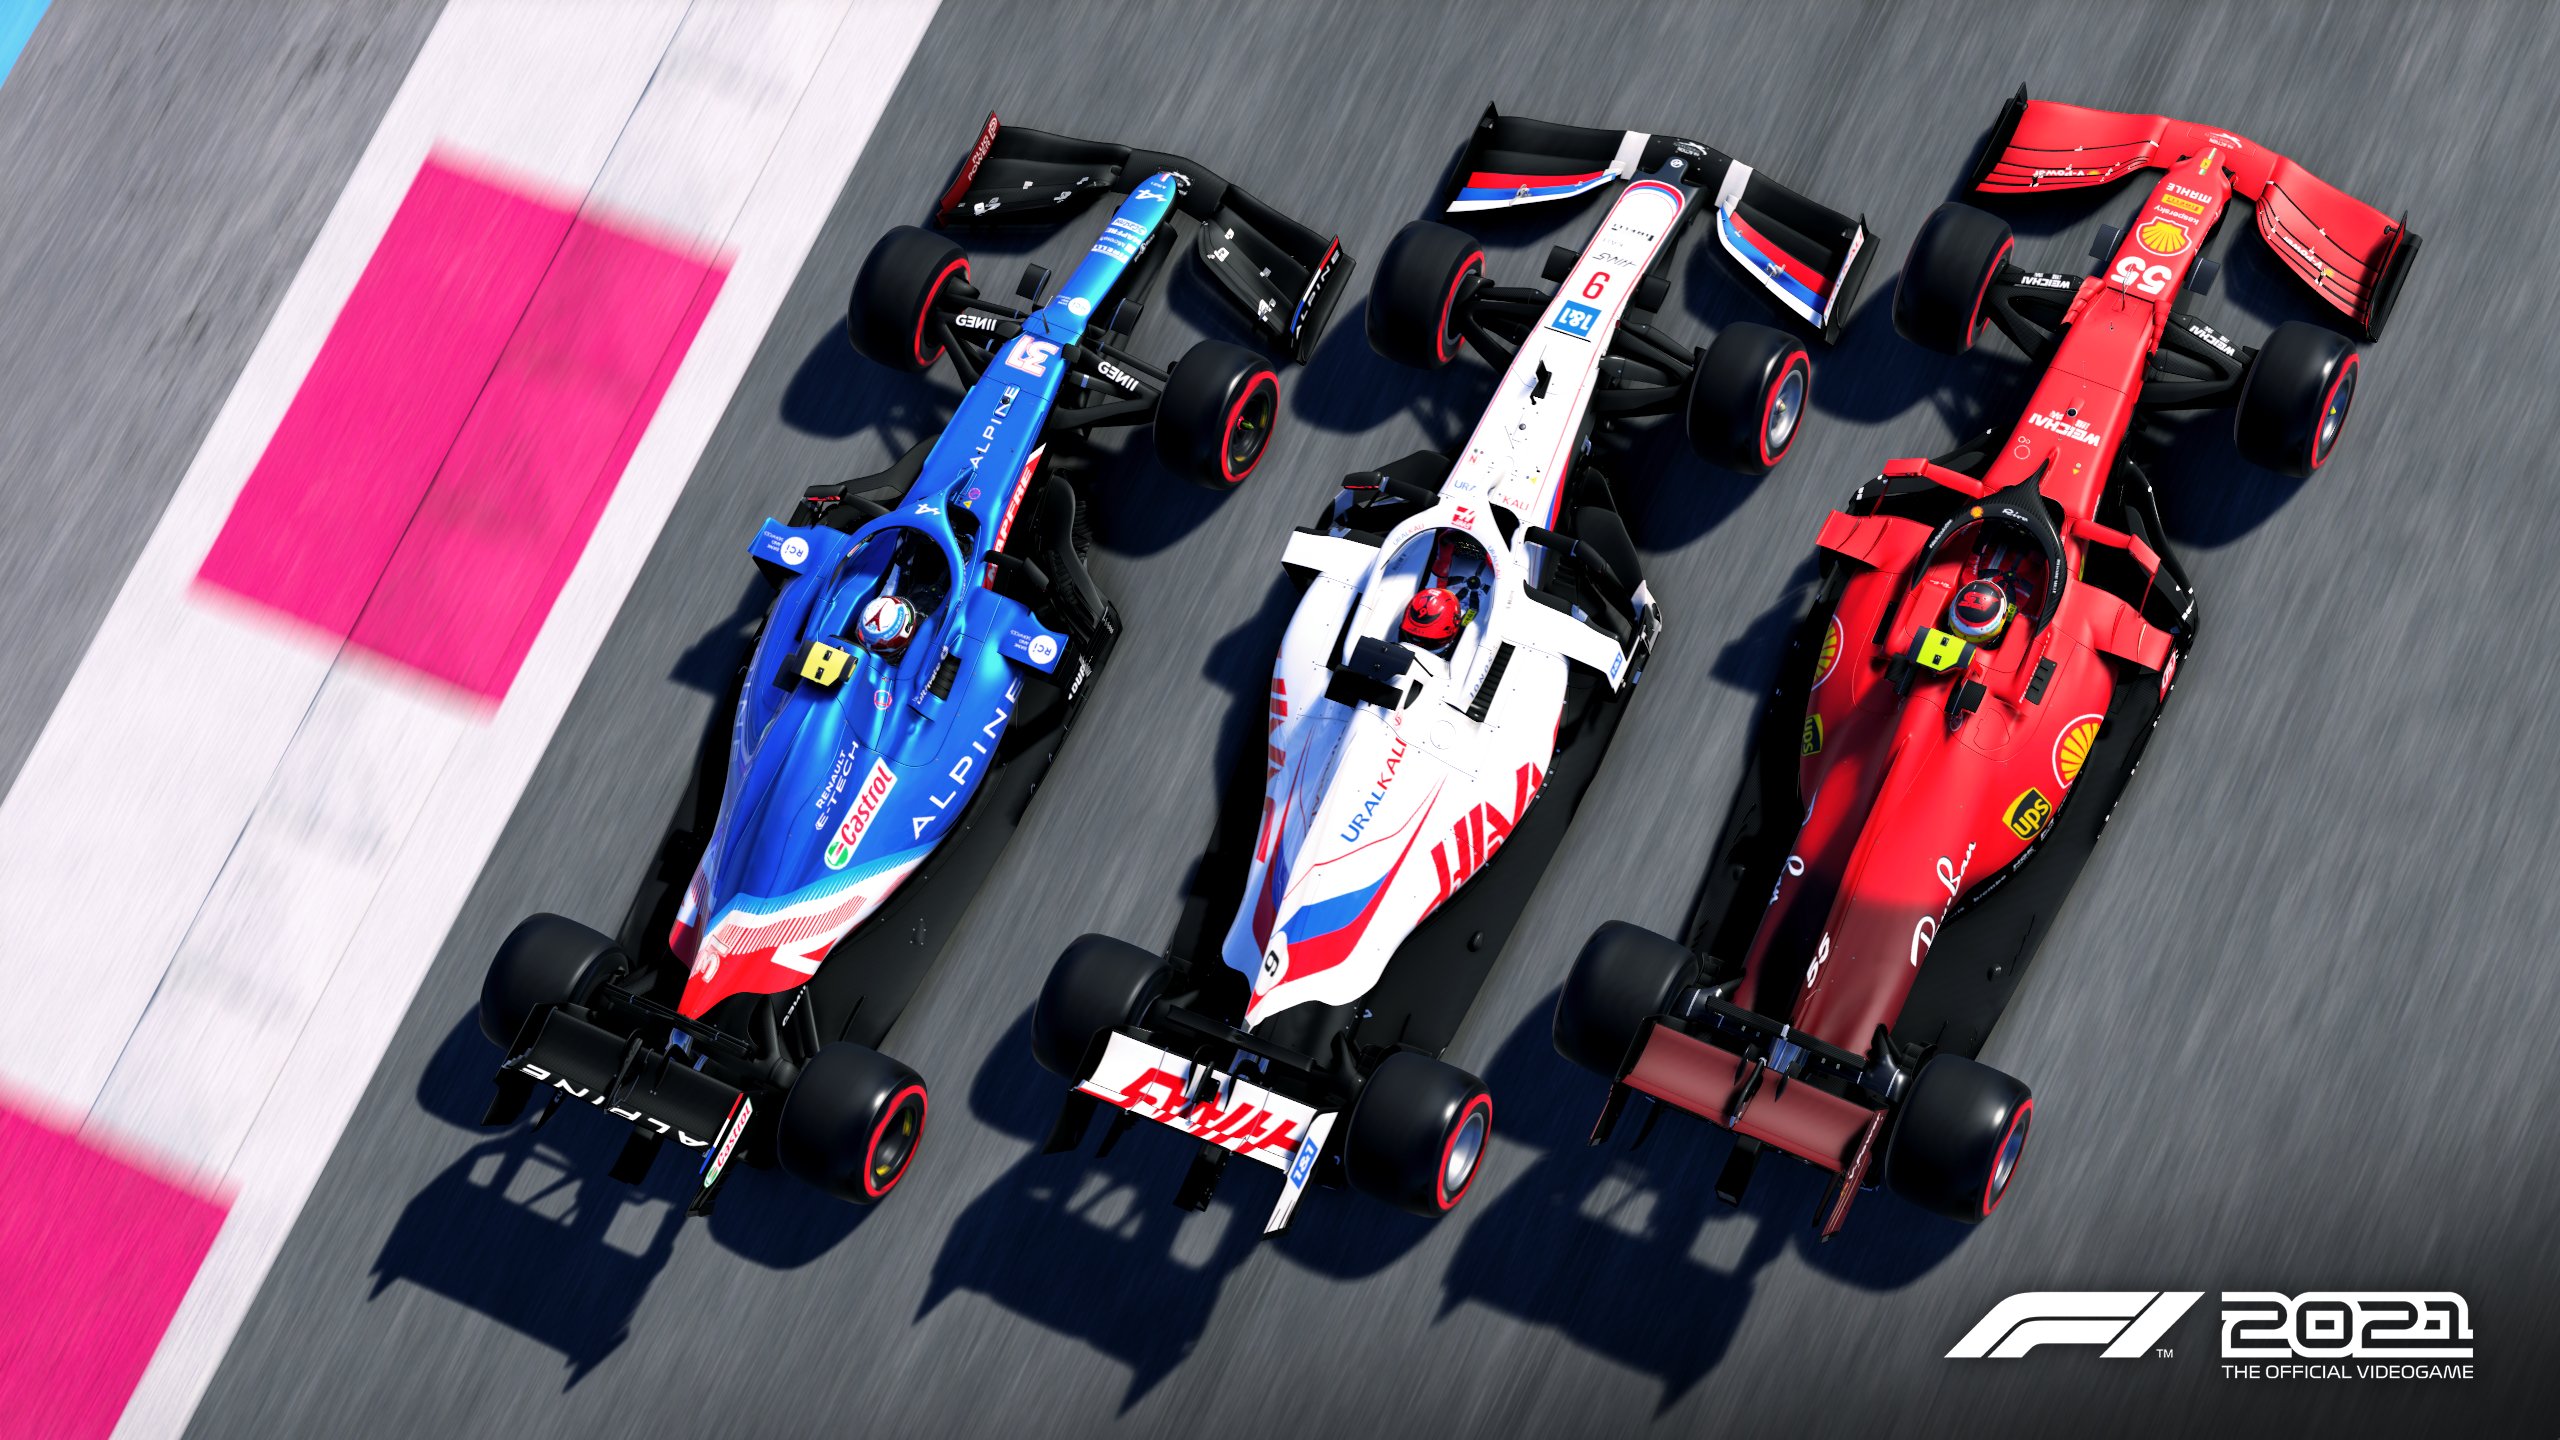 REALTIME delivers cinematics in record time on Codemasters new F1 2021 game